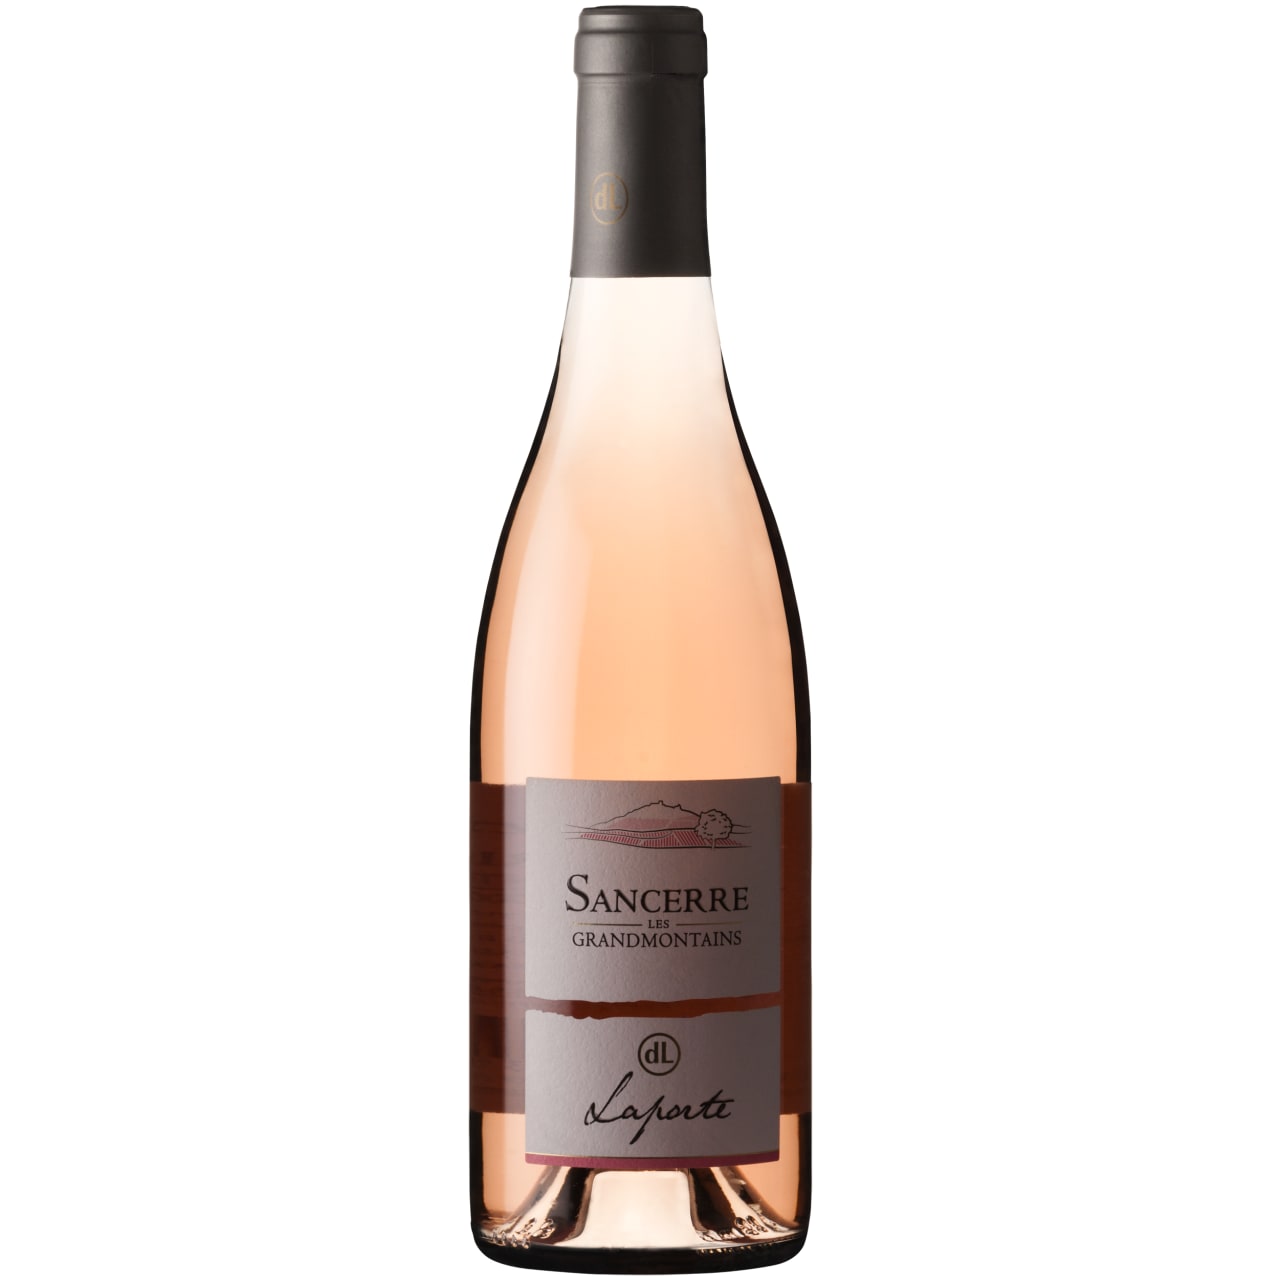 Salmon-pink Pinot Noir rosé with notes of grapefruit, rose petal and refreshing lemon on the finish.